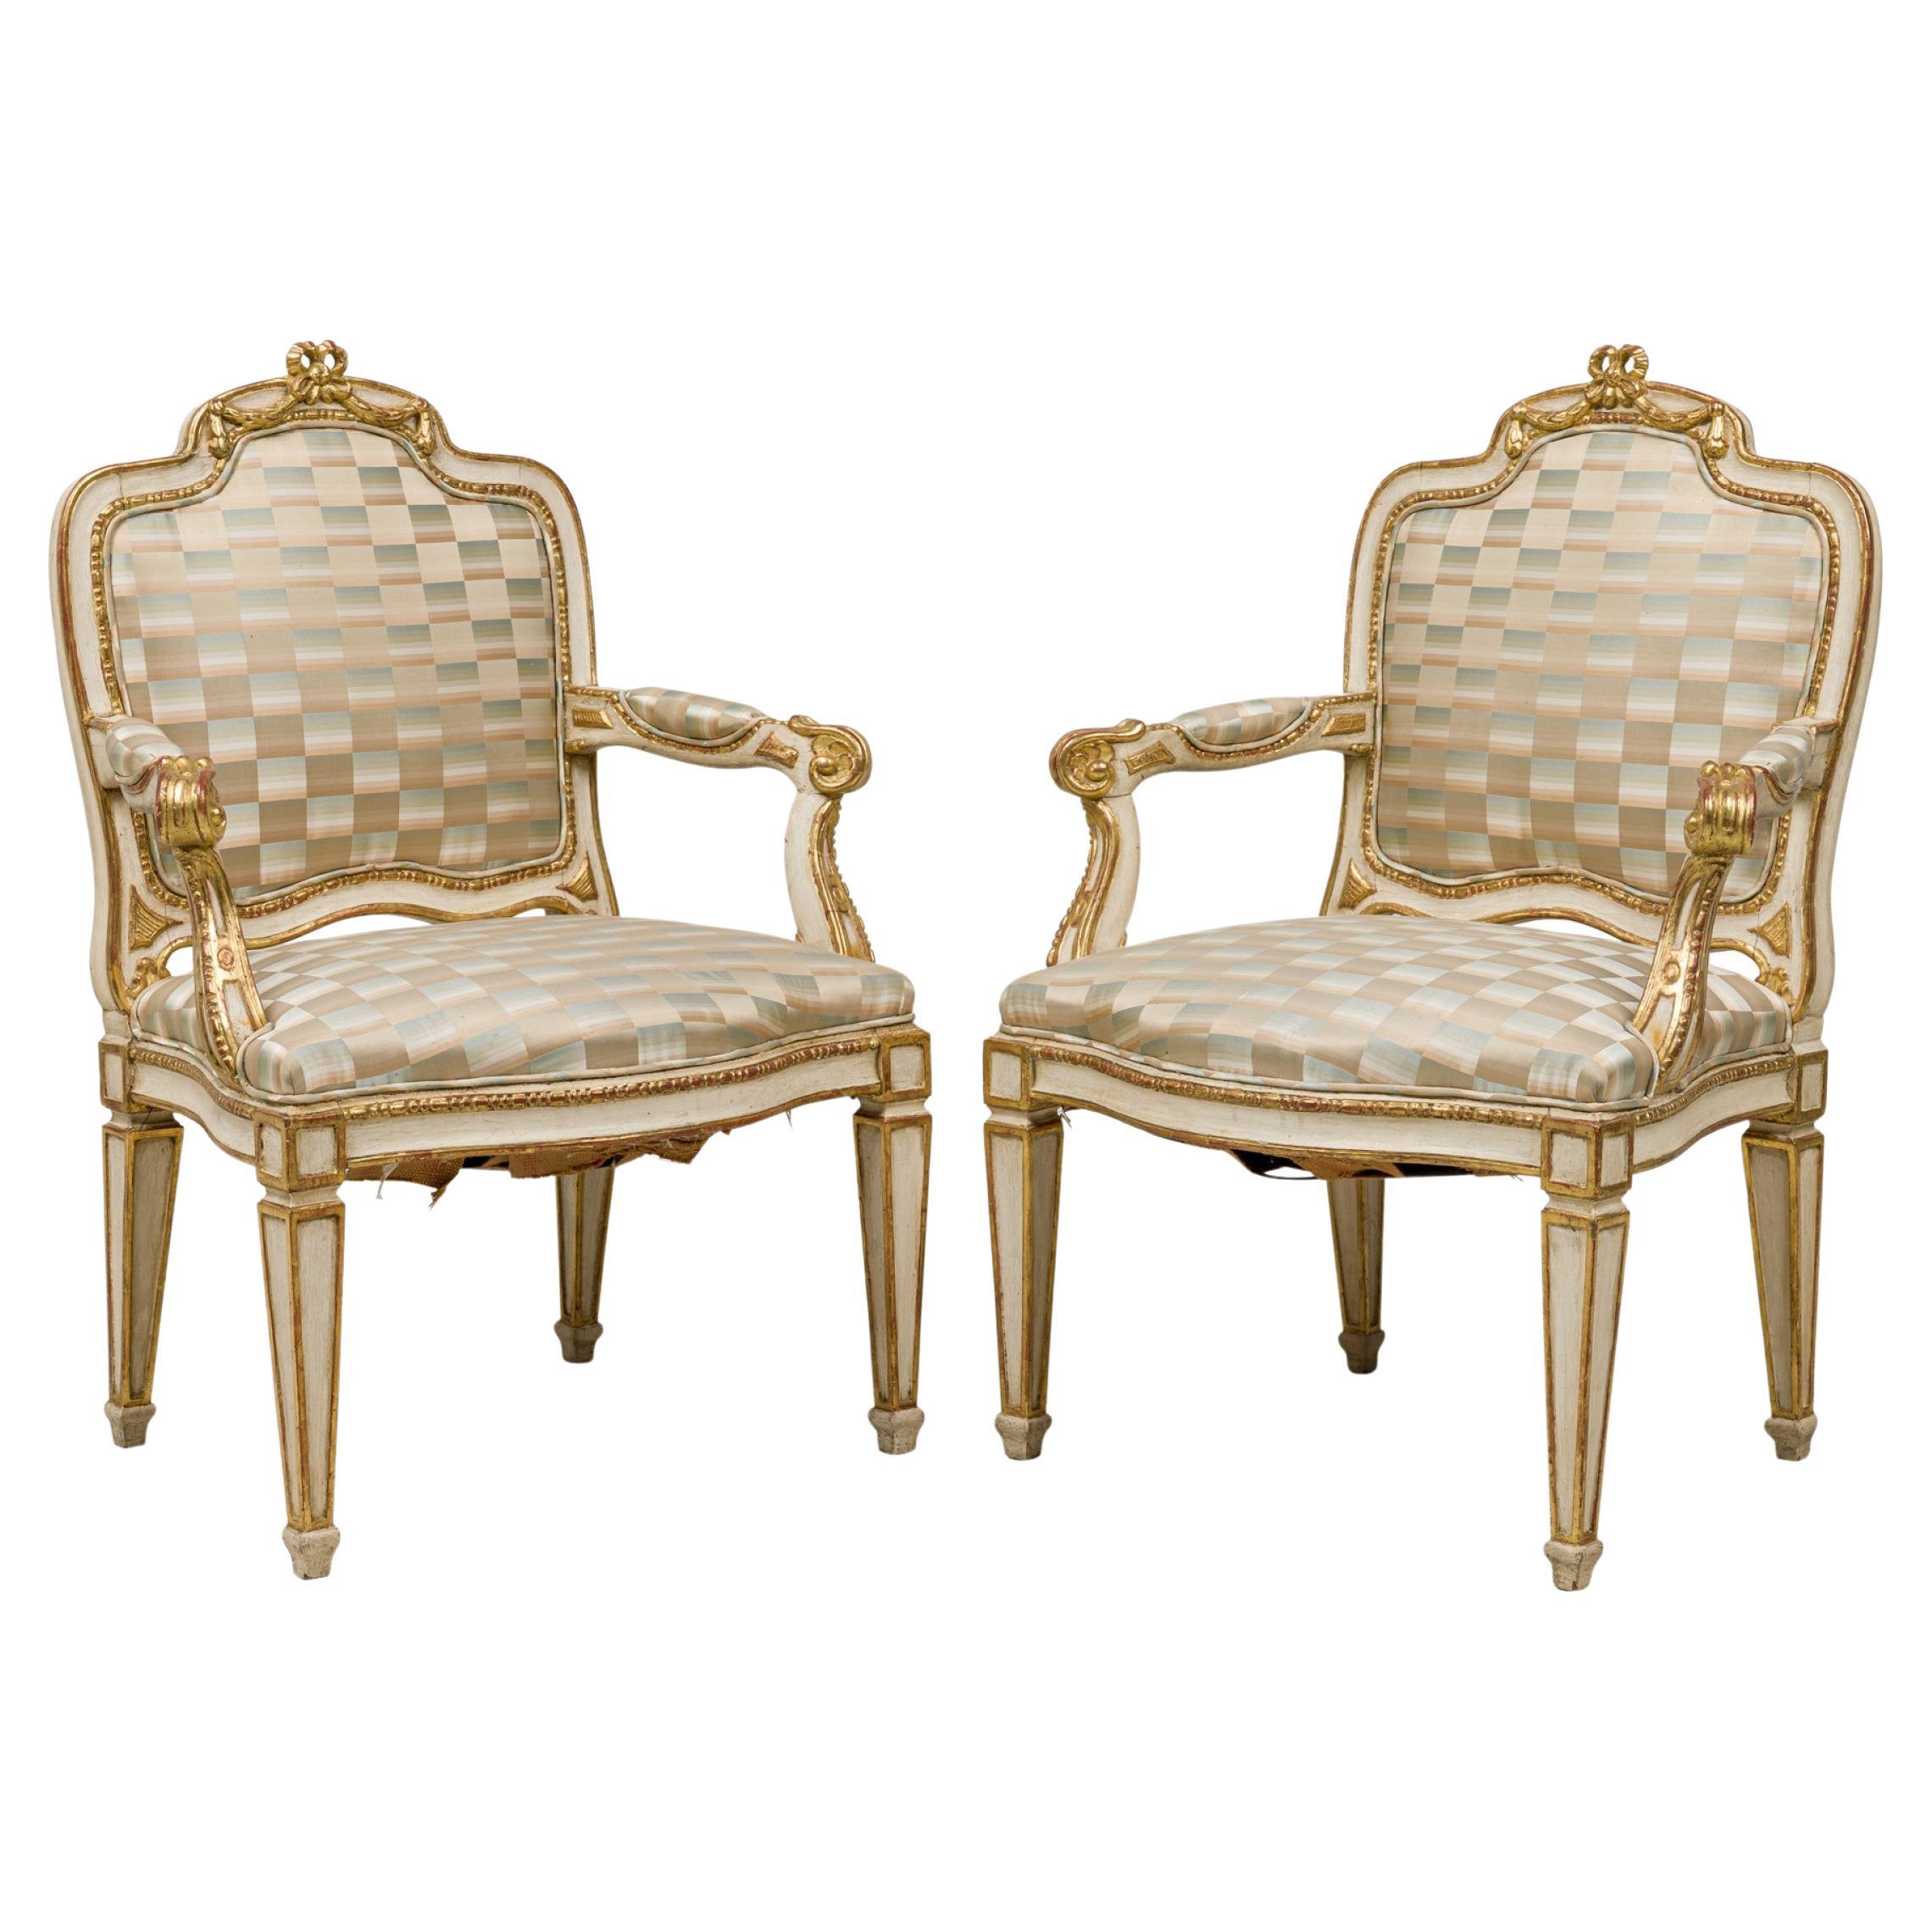 Pair of Swedish Neoclassic Cream Painted, Parcel-Gilt Armchairs